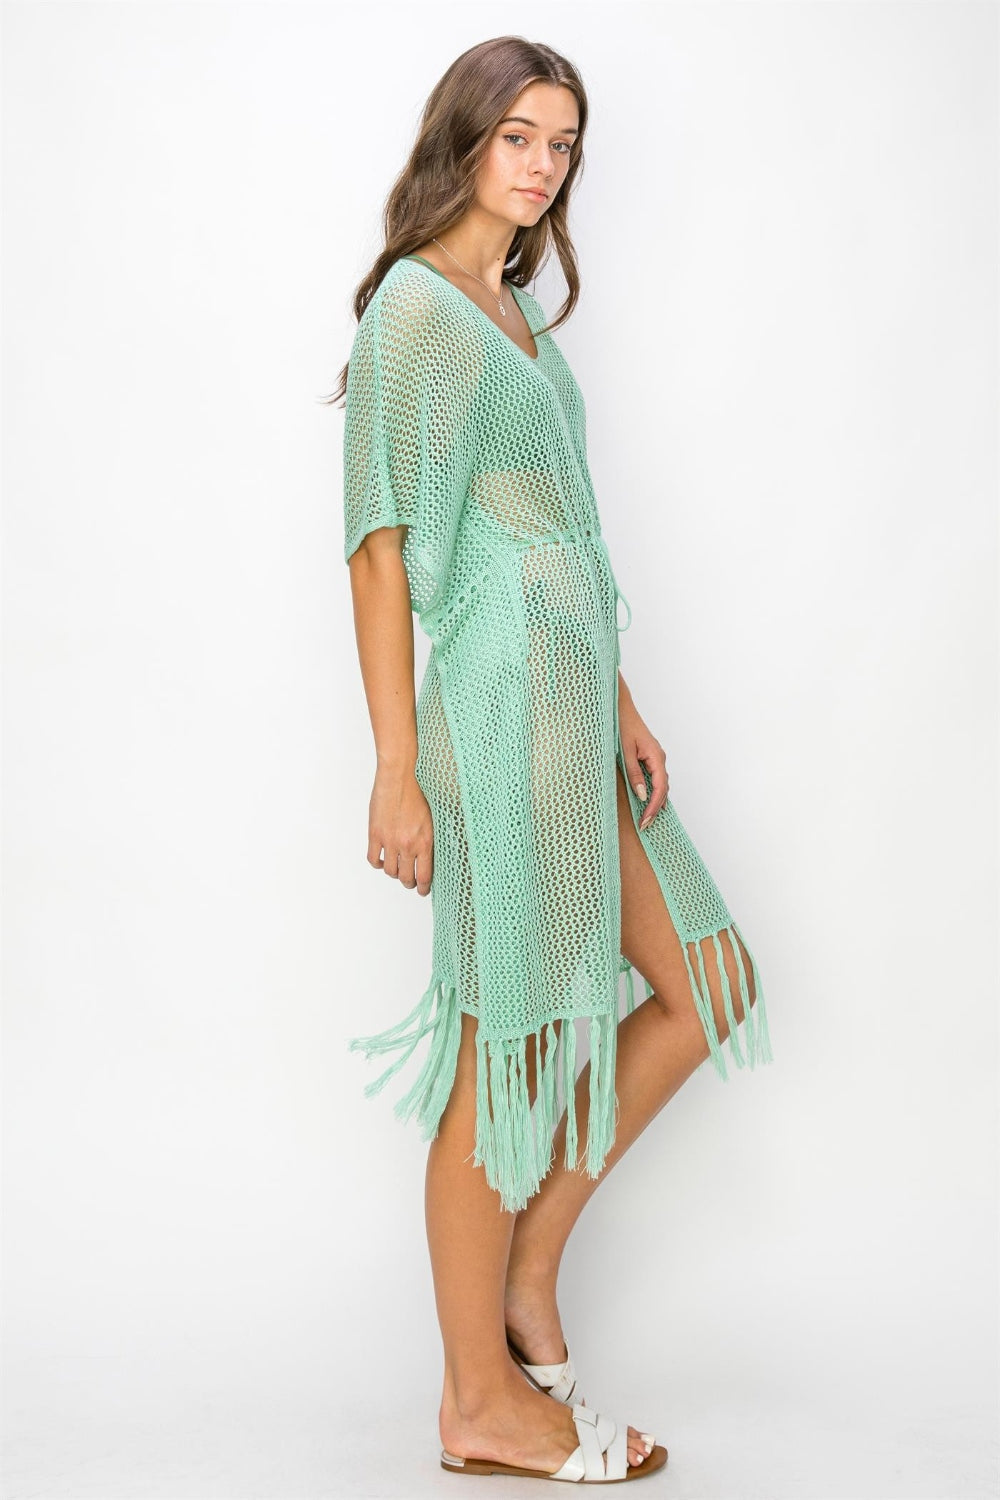 This drawstring waist fringed hem cover up is the perfect addition to your summer wardrobe. The adjustable drawstring waist allows for a customizable fit, while the fringed hem adds a trendy touch. S  -L